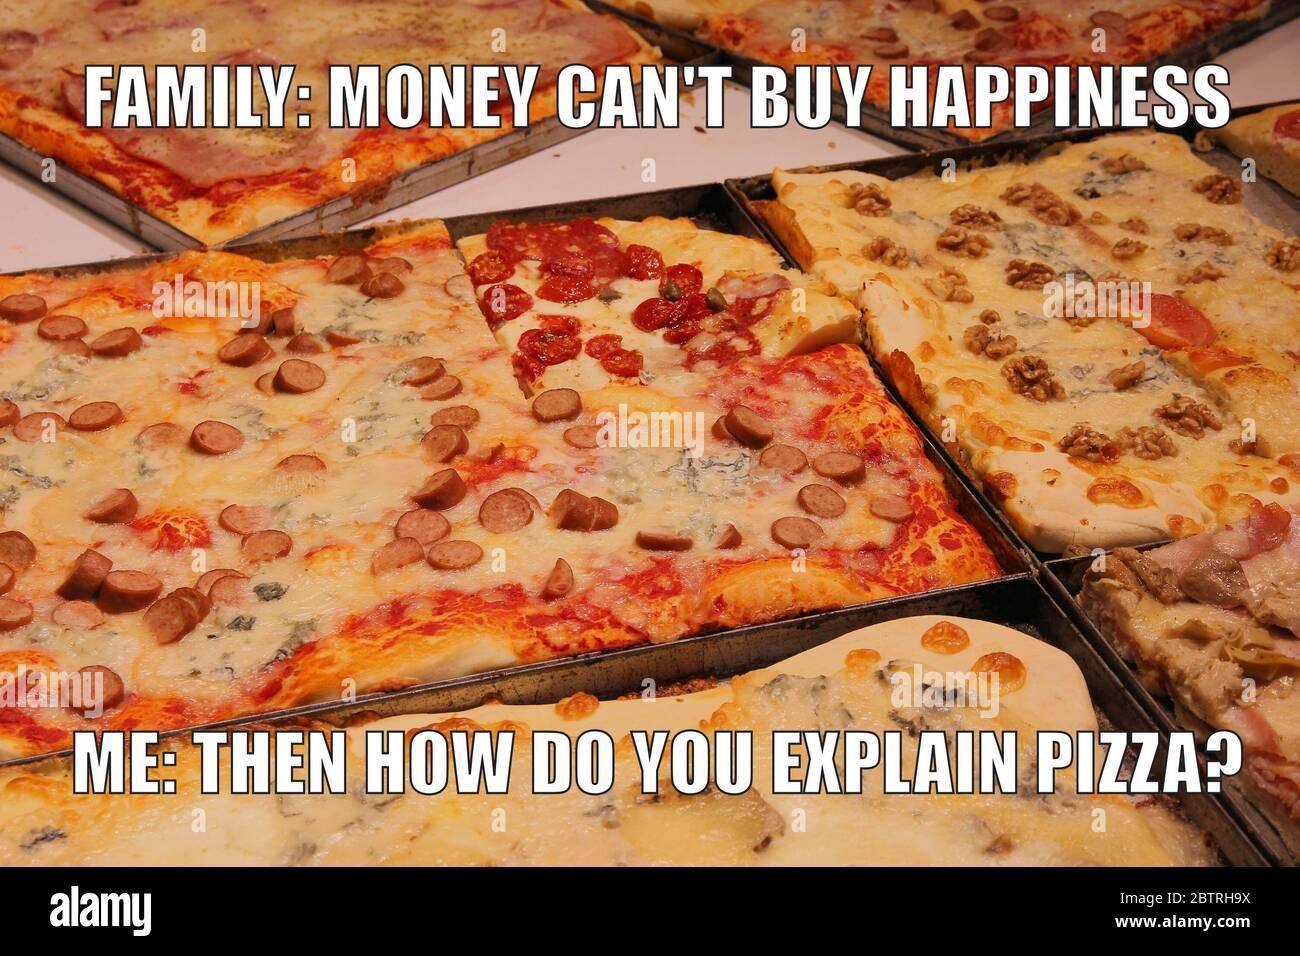 pizza-funny-meme-for-social-media-sharing-money-cant-buy-happiness-2BTRH9X